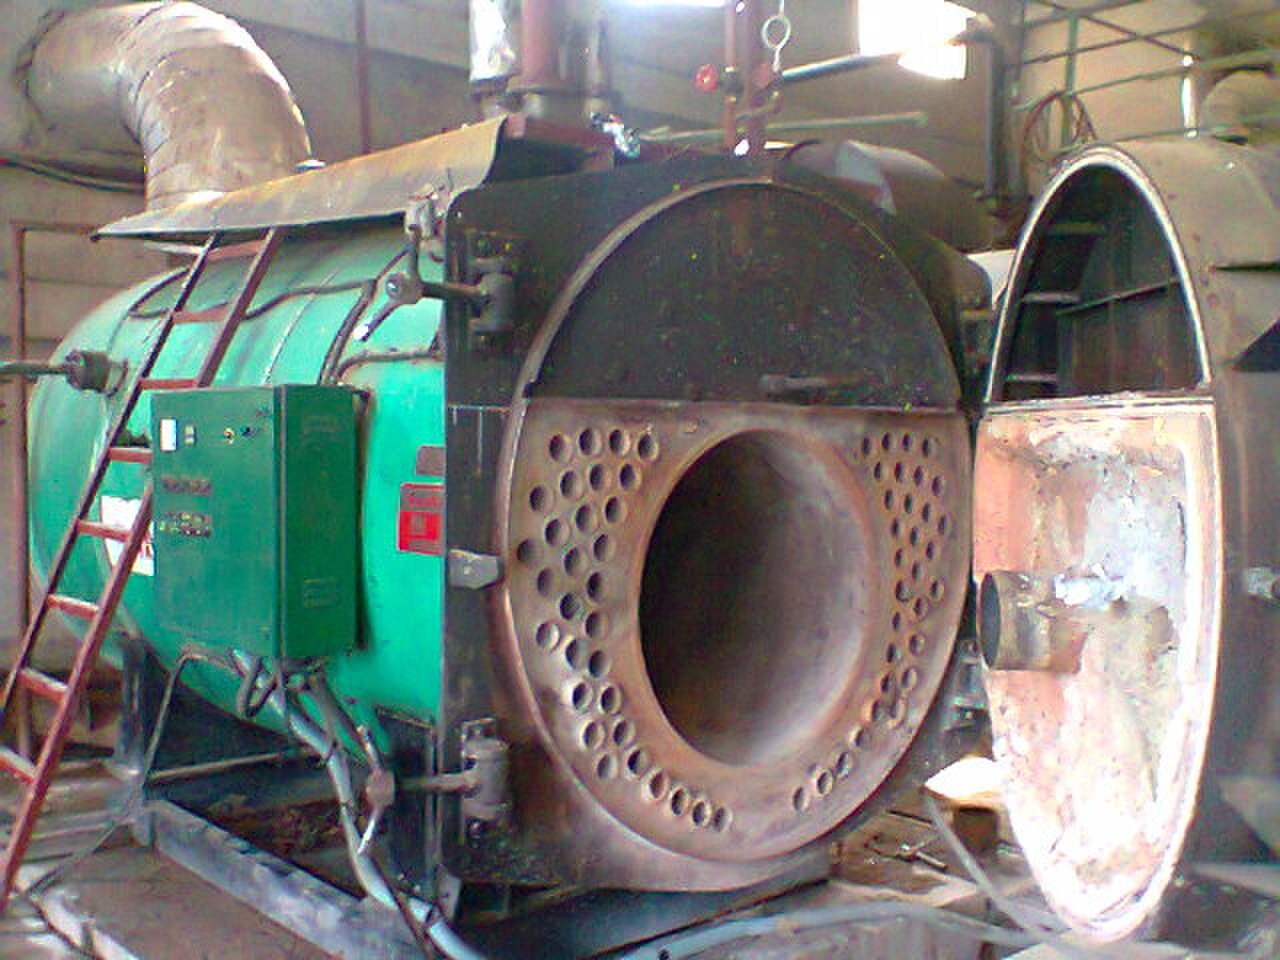 Superheater for steam фото 33